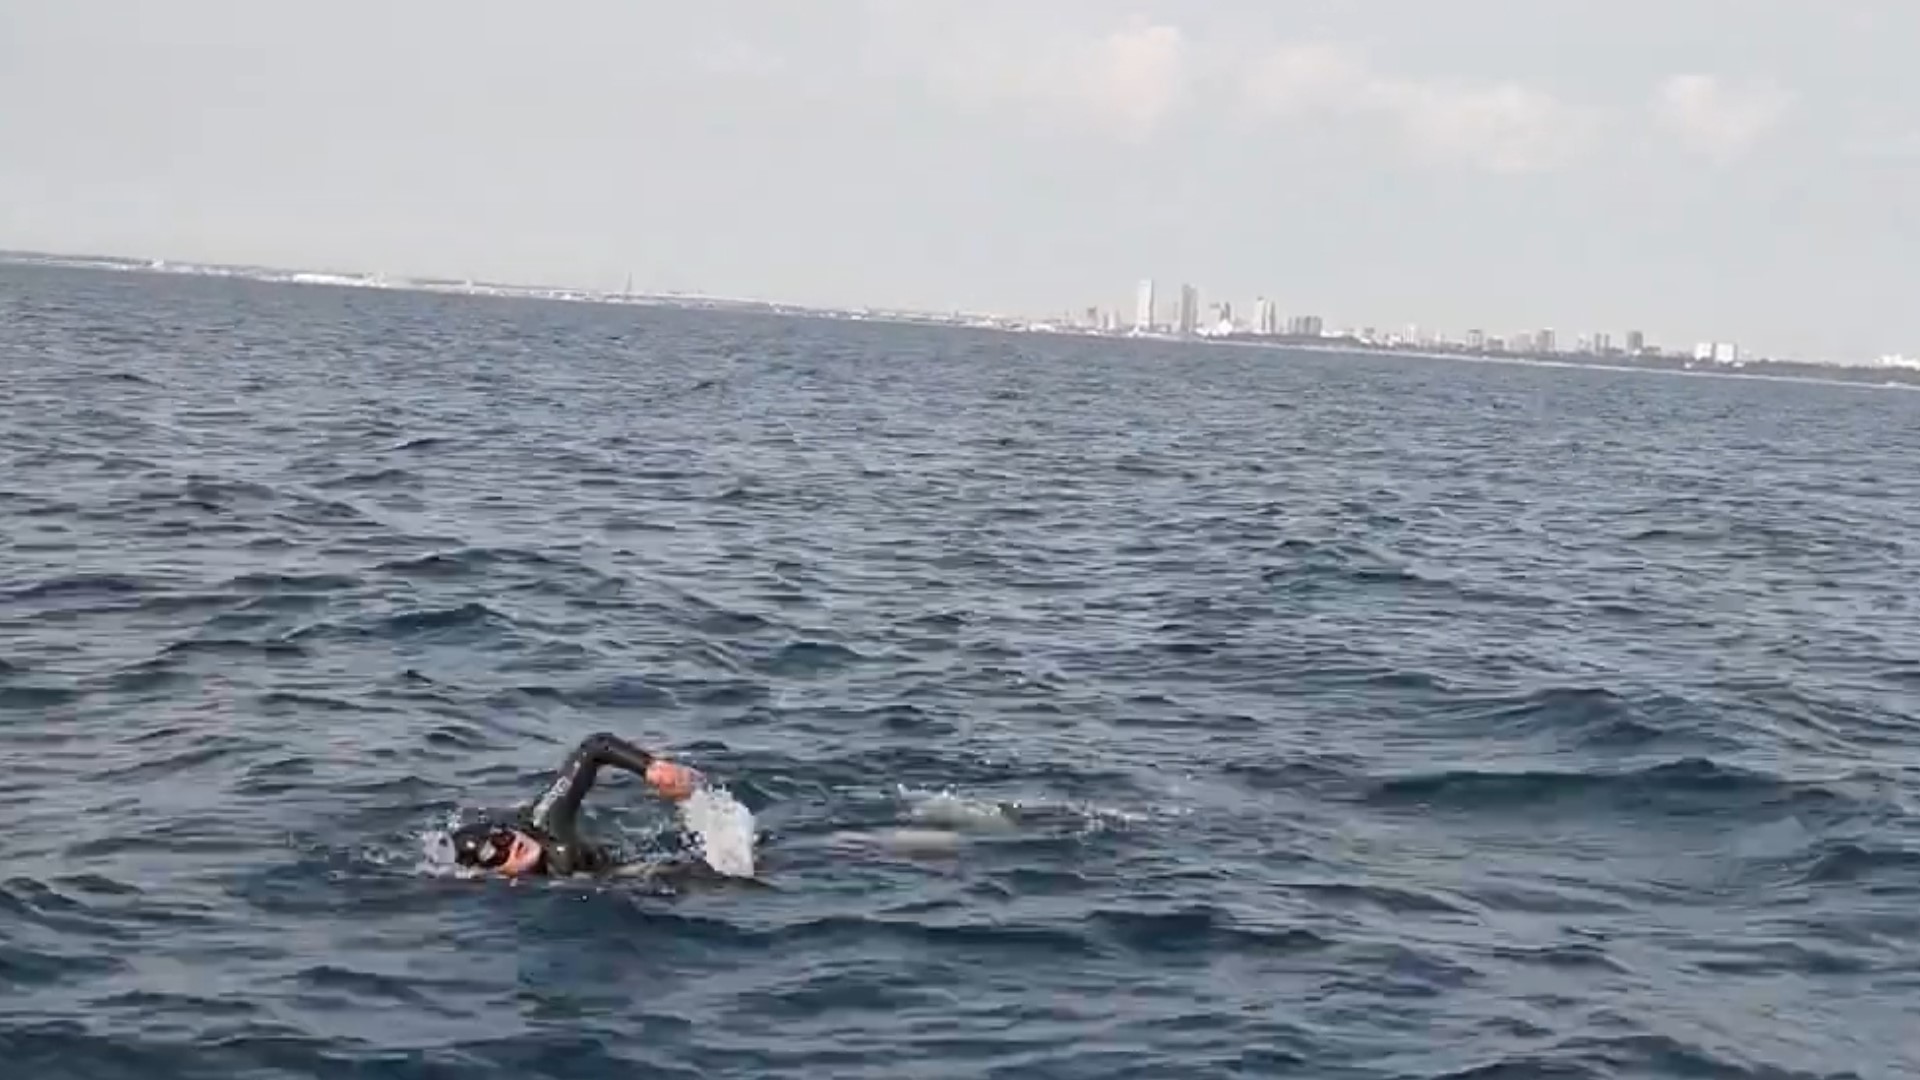 Jim Dreyer began his open swimming journey from Milwaukee and was aiming to make it across Lake Michigan to Grand Haven. (credit Jena McClurken)